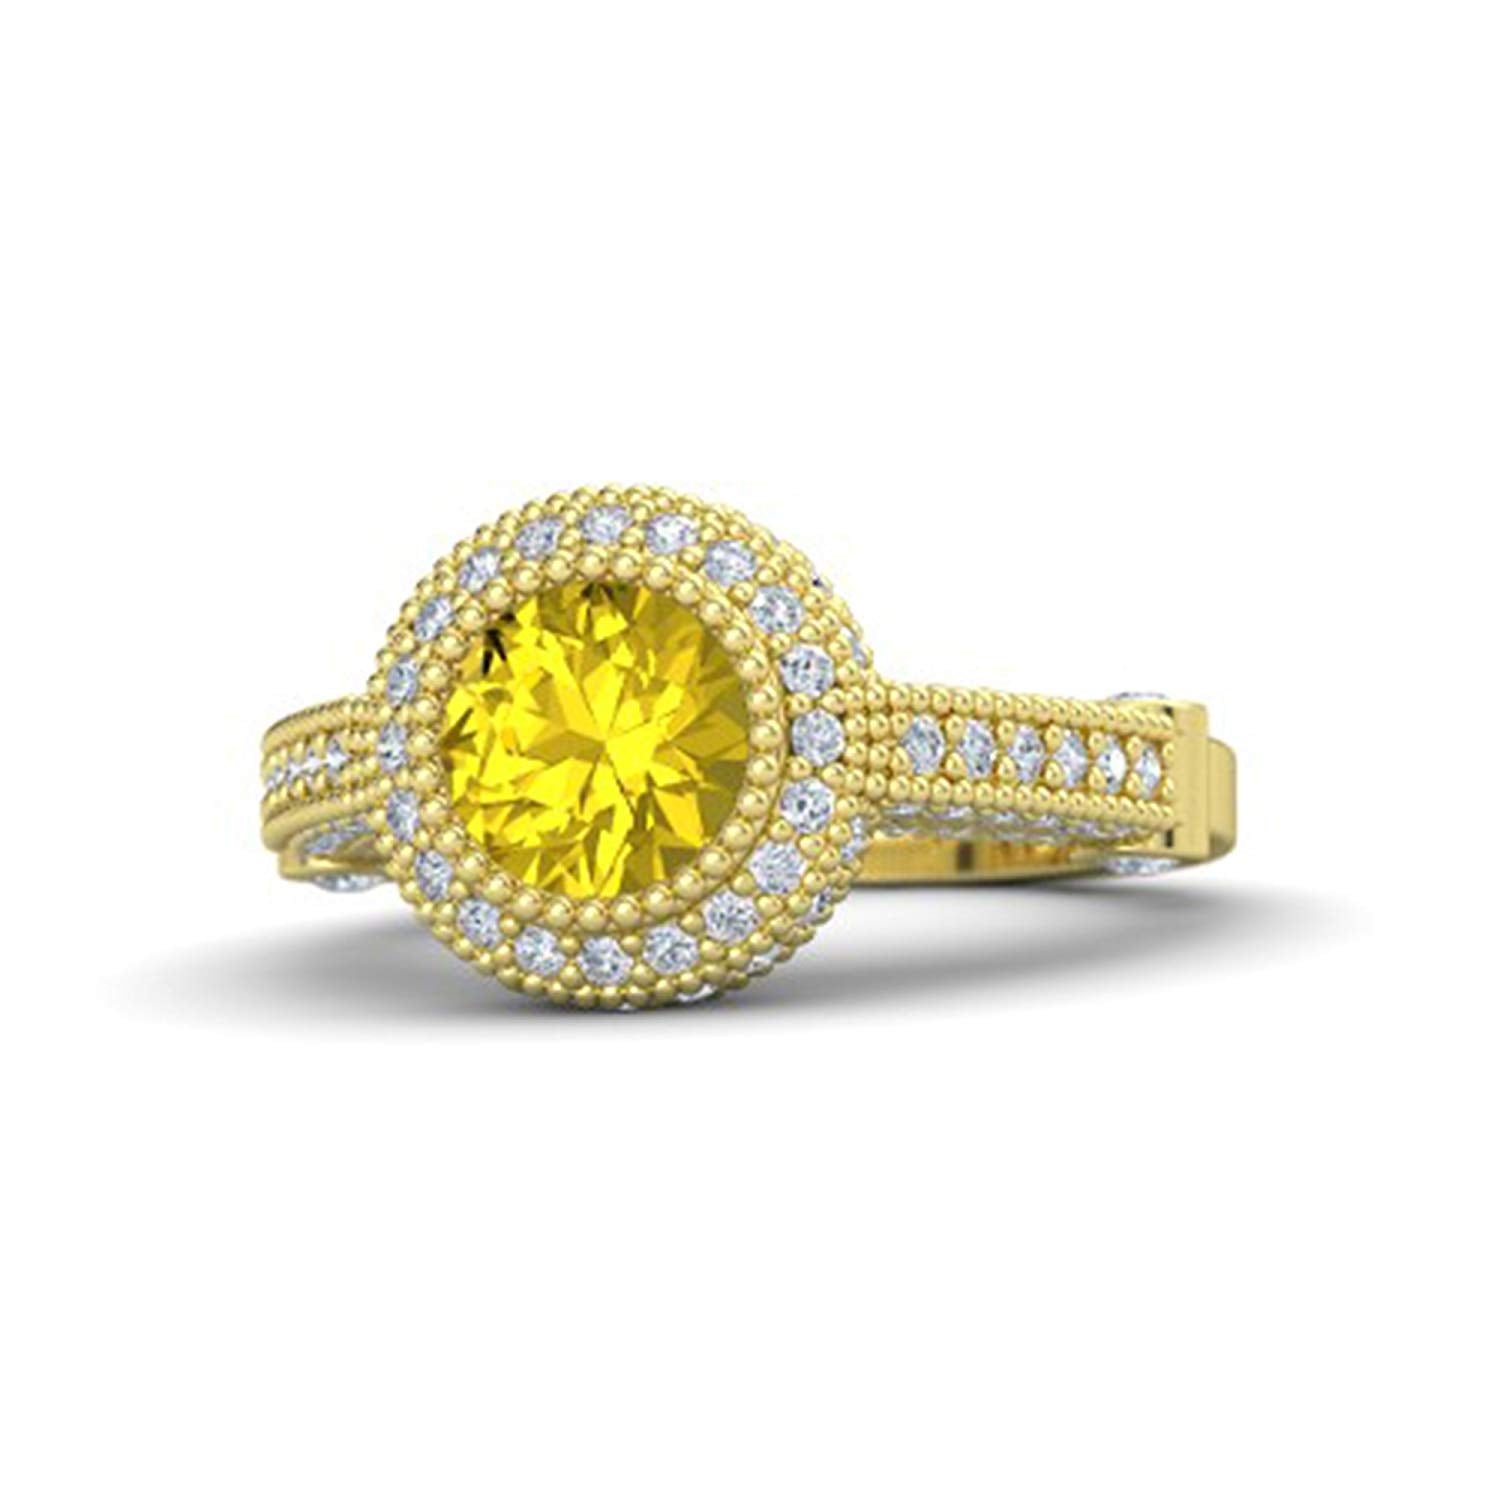 Yellow Sapphire Ring - Oval 6.75 Ct. - 18K Yellow Gold